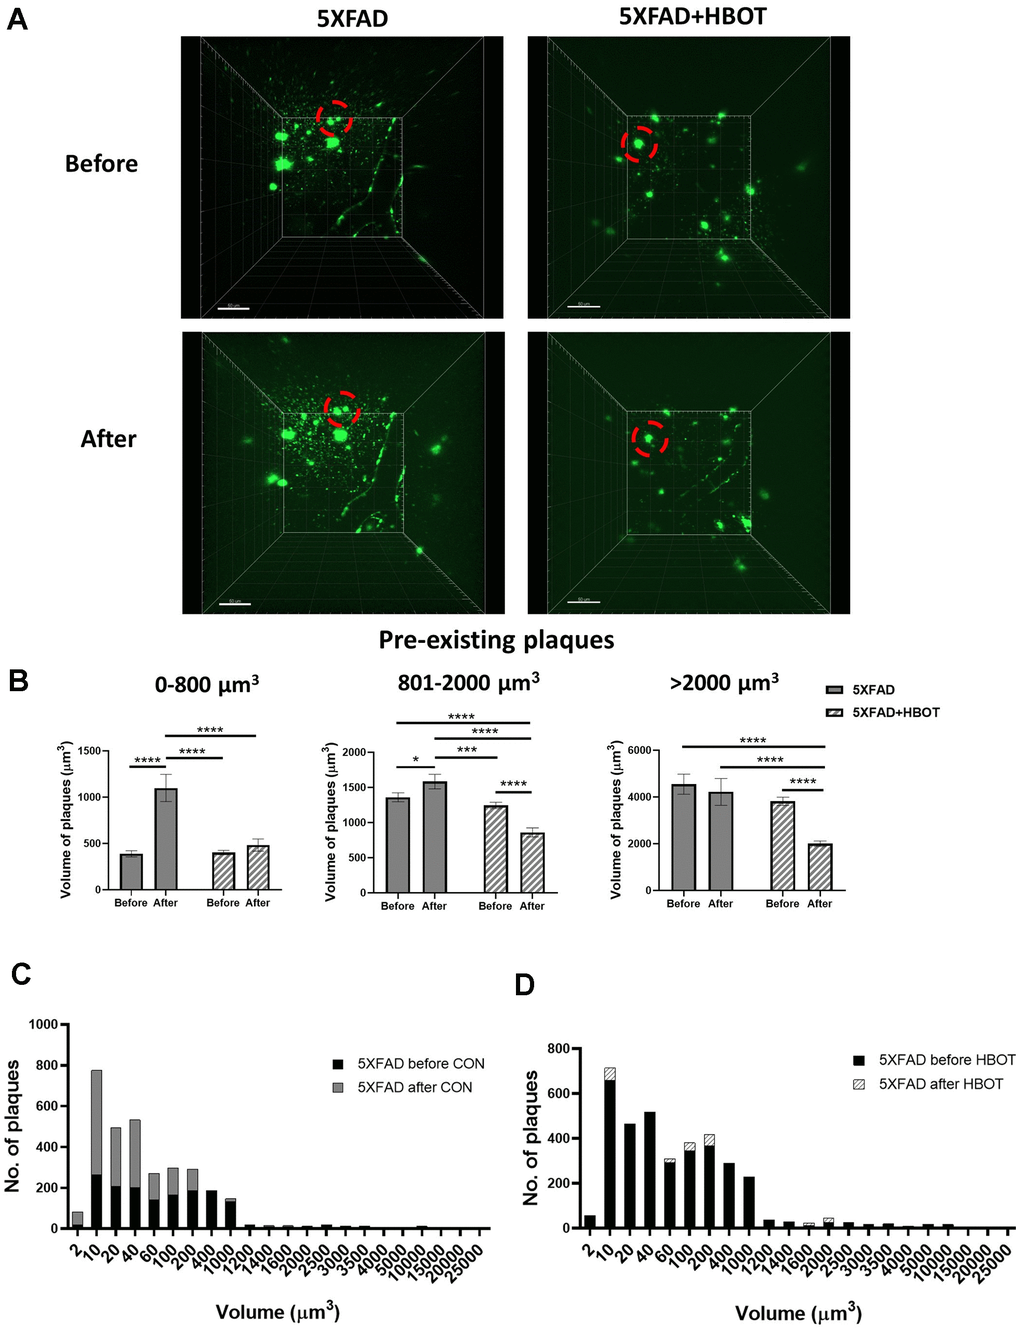 HBOT reduces the population of newly-formed plaques and reduces the volume of pre-existing plaques. Amyloid plaques were visualized in vivo using two-photon microscopy imaging in live animals by injecting methoxy-X04 24 h before every imaging session. (A) Representative images of plaques in the somatosensory cortex of HBO-treated 5XFAD (n=4, right panel) and control 5XFAD mice (n=3, left panel) before (upper panel) and after 1 month of treatment (lower panel); red circles indicate the change in specific plaques, scale bar: 50 μm. (B) Analysis of the volume of pre-existing plaques before and after each treatment in the same animal, categorized according to initial plaque size. (C, D) Distribution of plaque populations by volume in control 5XFAD (C; before: N=1619, after: N=3180) and HBO-treated 5XFAD mice (D; before: N=3425, after: N=3524). Two-way ANOVA with repeated measures and post-hoc Fisher LSD tests were performed. Values represent means ± SEM. *P P P 